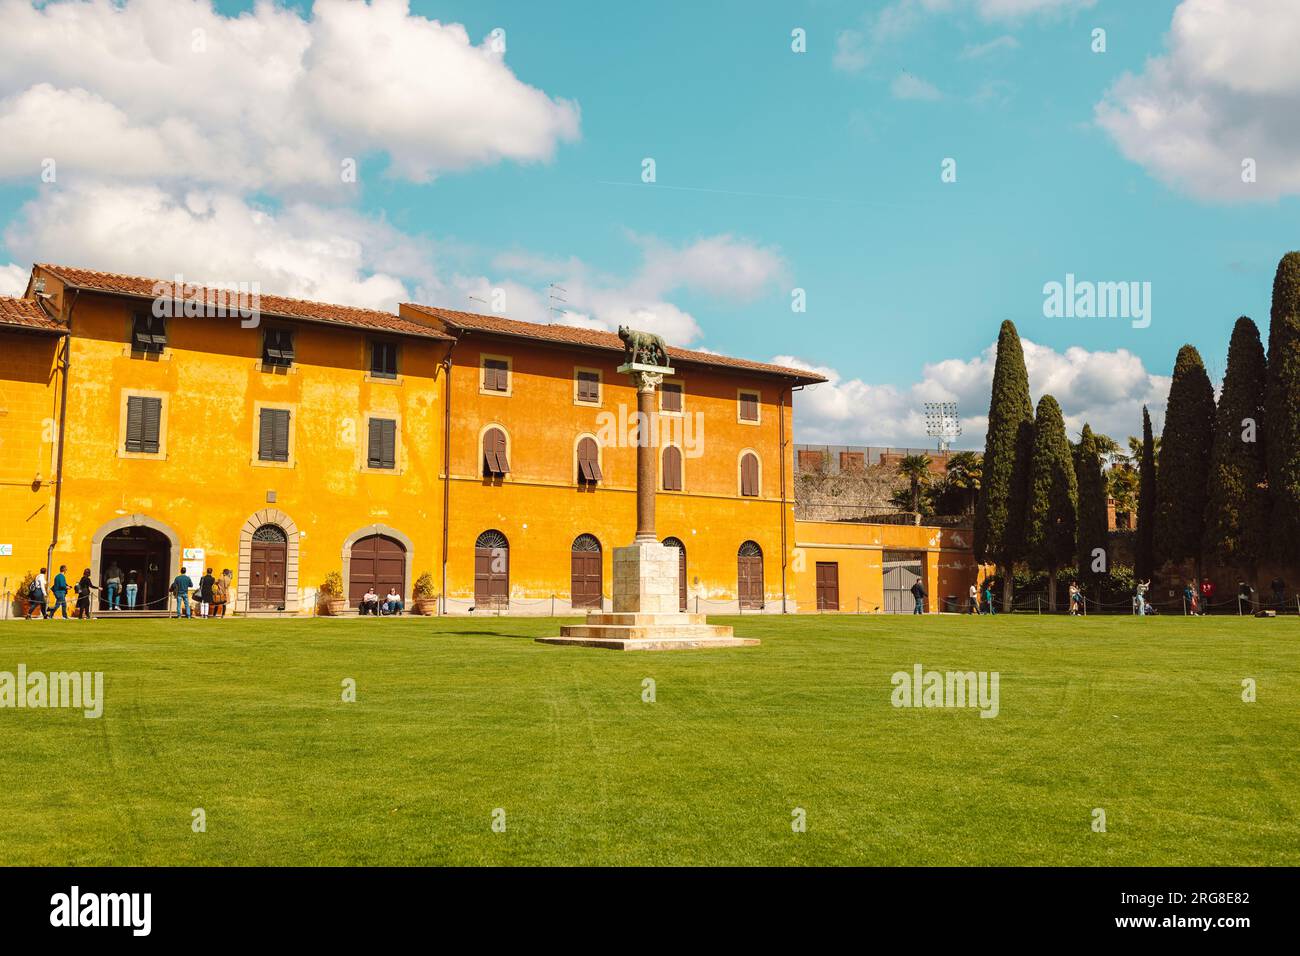 Pisa, Italy - March 18, 2023: Palazzo dell'Opera palace, Angelo Caduto statue, Lupa capitolina monument on square with green grass lawn, blue sky Stock Photo